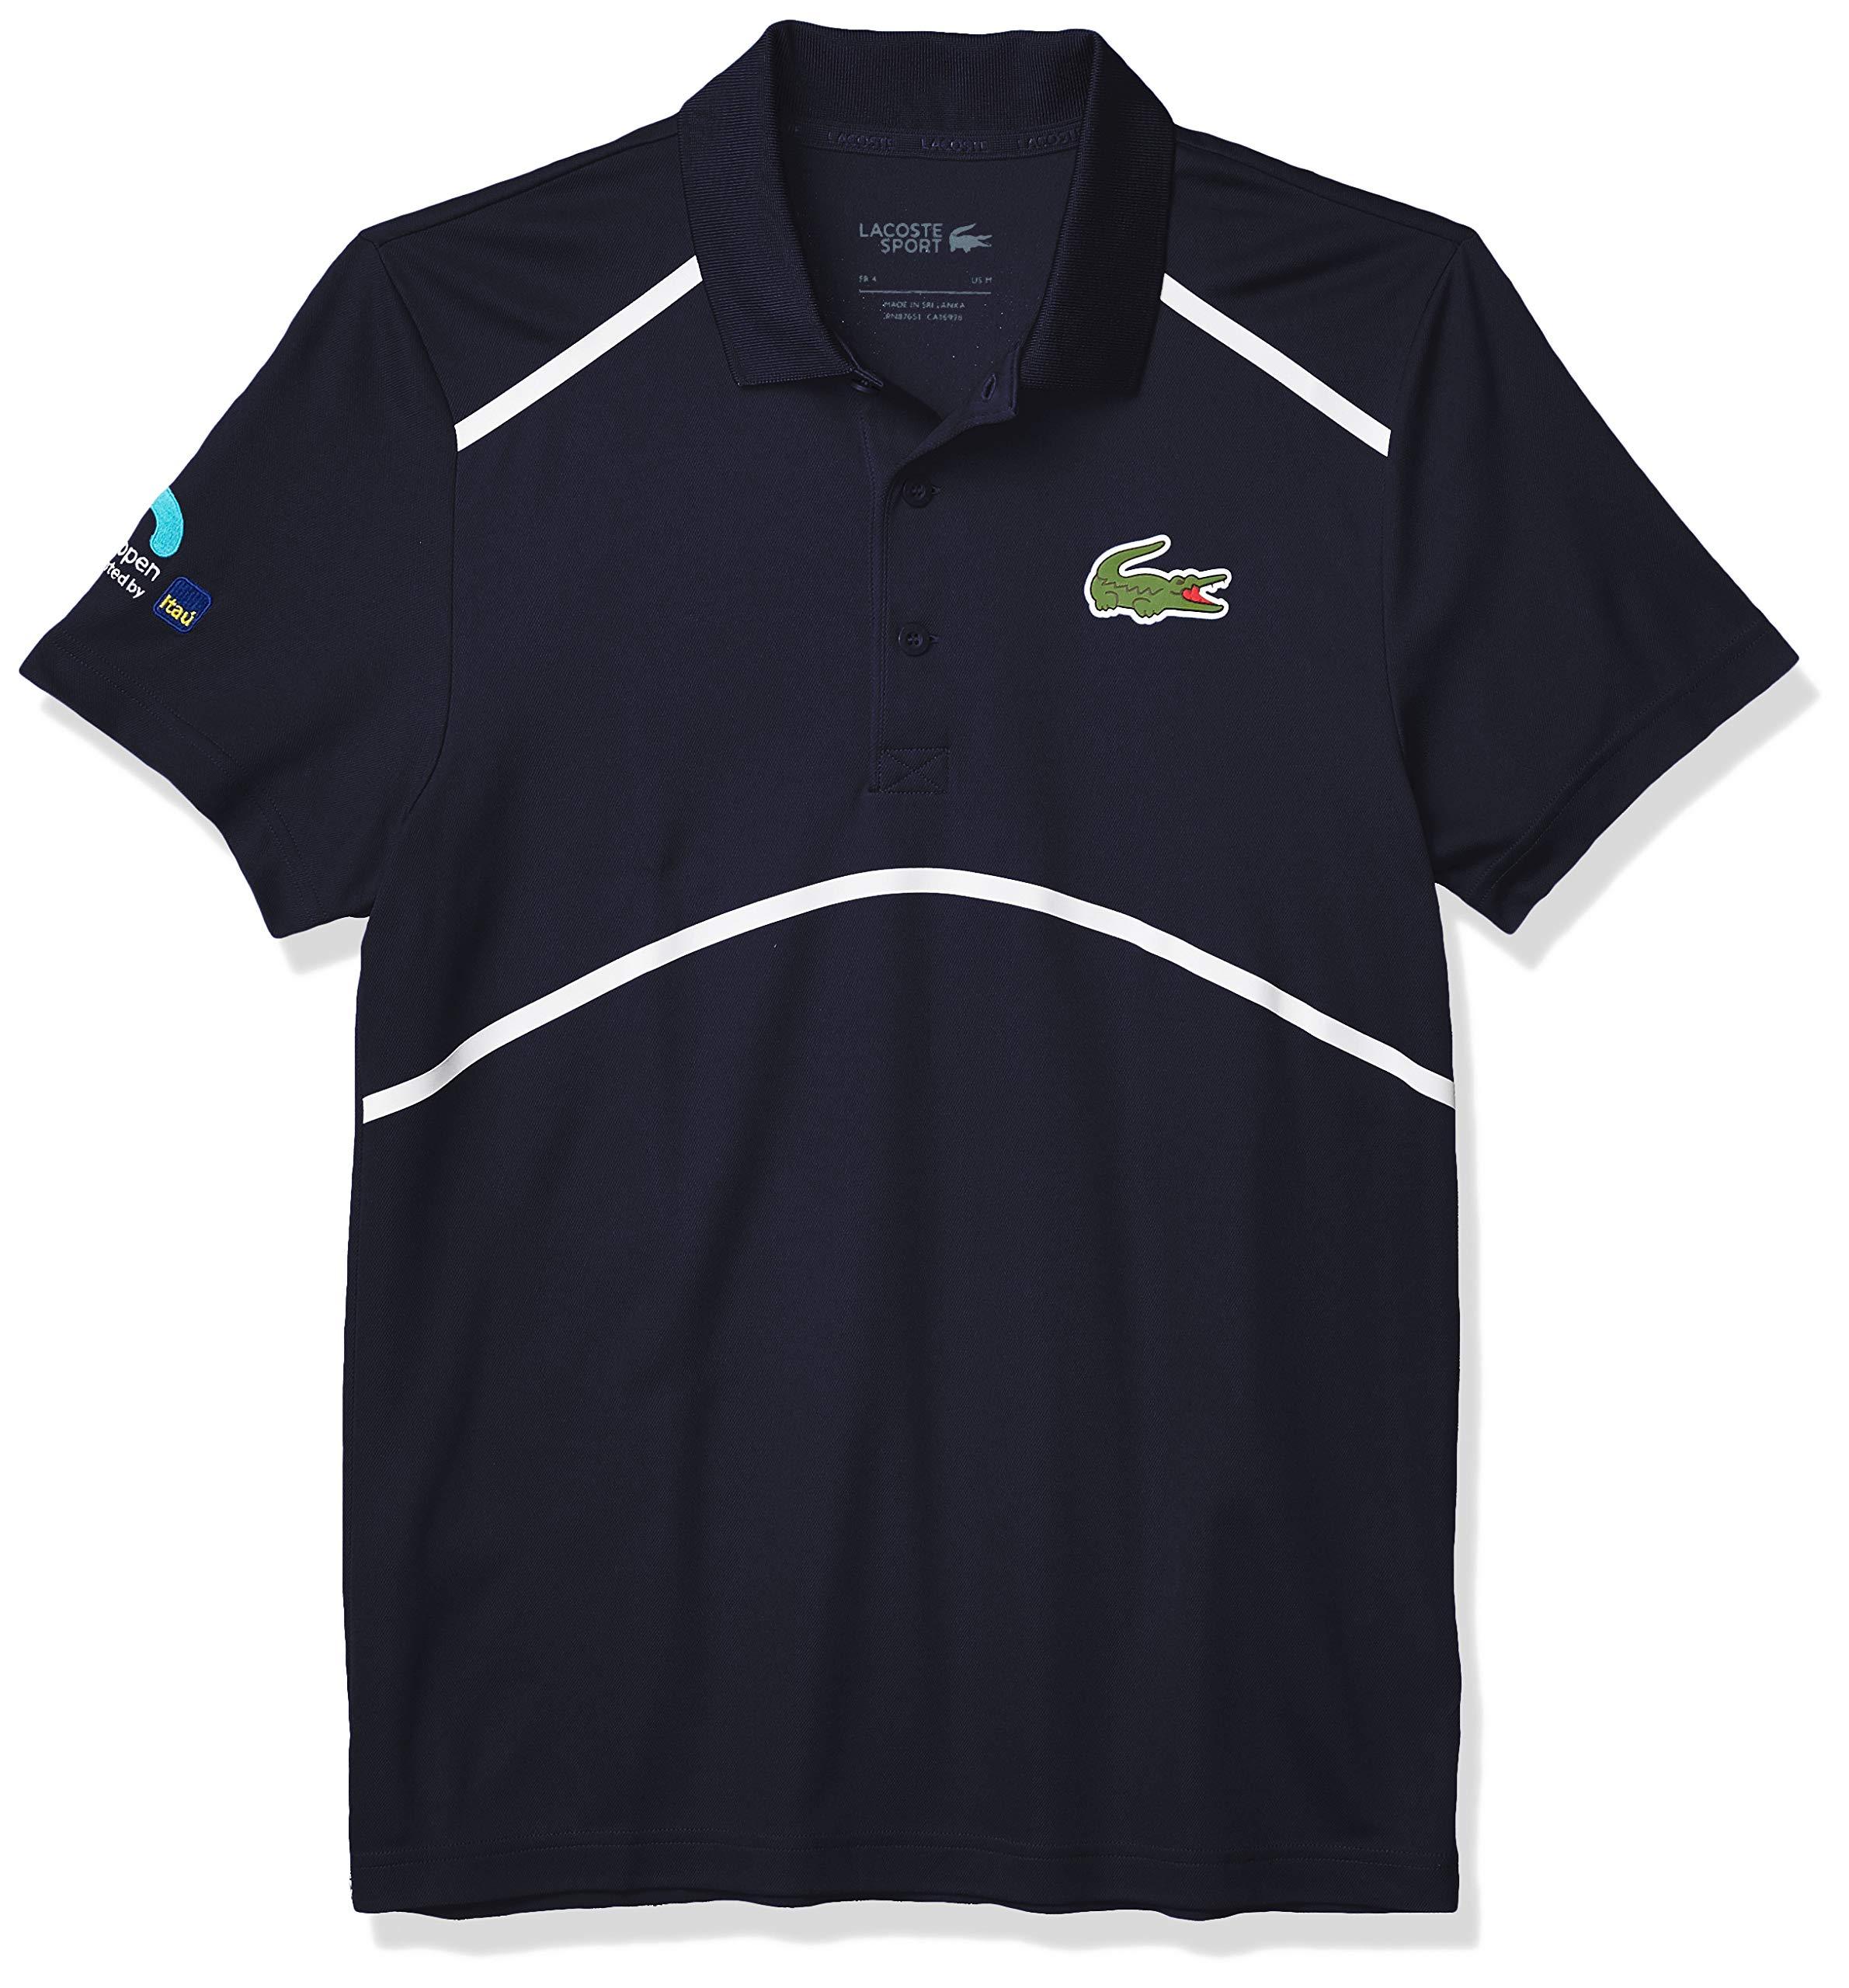 Lacoste Sport Miami Open Ultra Dry Graphic Polo Shirt in Navy Blue